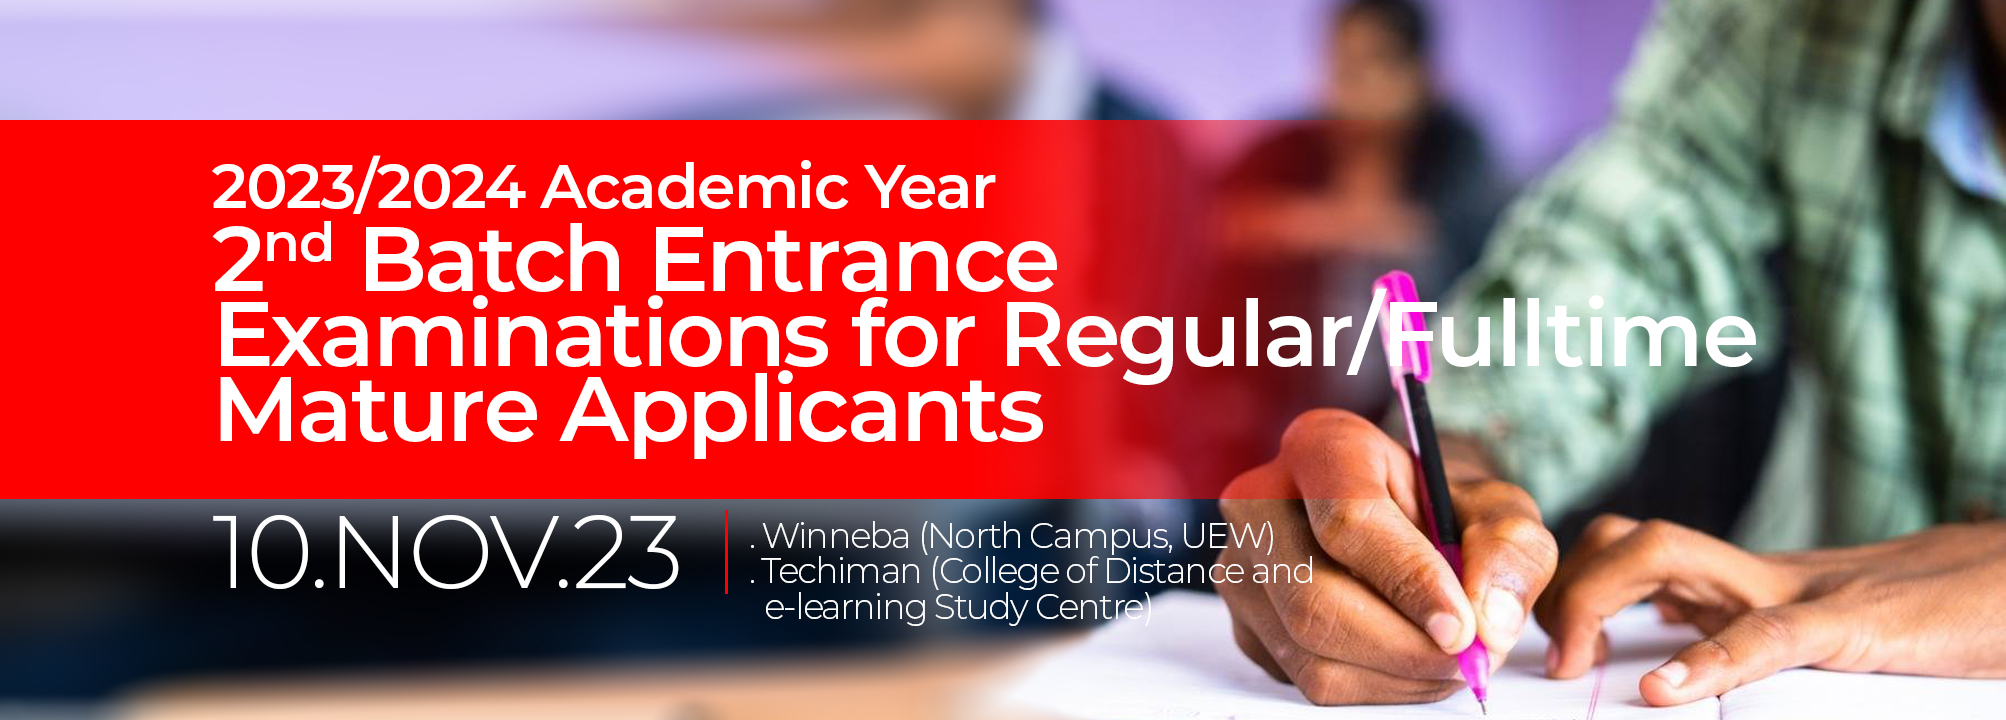 The University of Education, Winneba wishes to inform the general public and especially Mature applicants that the second batch of Entrance Examinations for the 2023/2024 Academic Year is scheduled as follows: Date: Friday,10th November, 2023 Time: General Aptitude Test (G.A.T.): 9:00am-11:00 am Subject Area Test (S.A.T.): 1:00pm-3:00pm Venues: Winneba (North Campus, UEW) Techiman (College of Distance and e-learning Study Centre) Note: Applicants are kindly required to come along with a valid national ID Card/Driver’s license for identification. Index numbers for the examinations would be sent to candidates via text messages Physical Education and Special Education applicants would write the examination in Winneba ONLY.